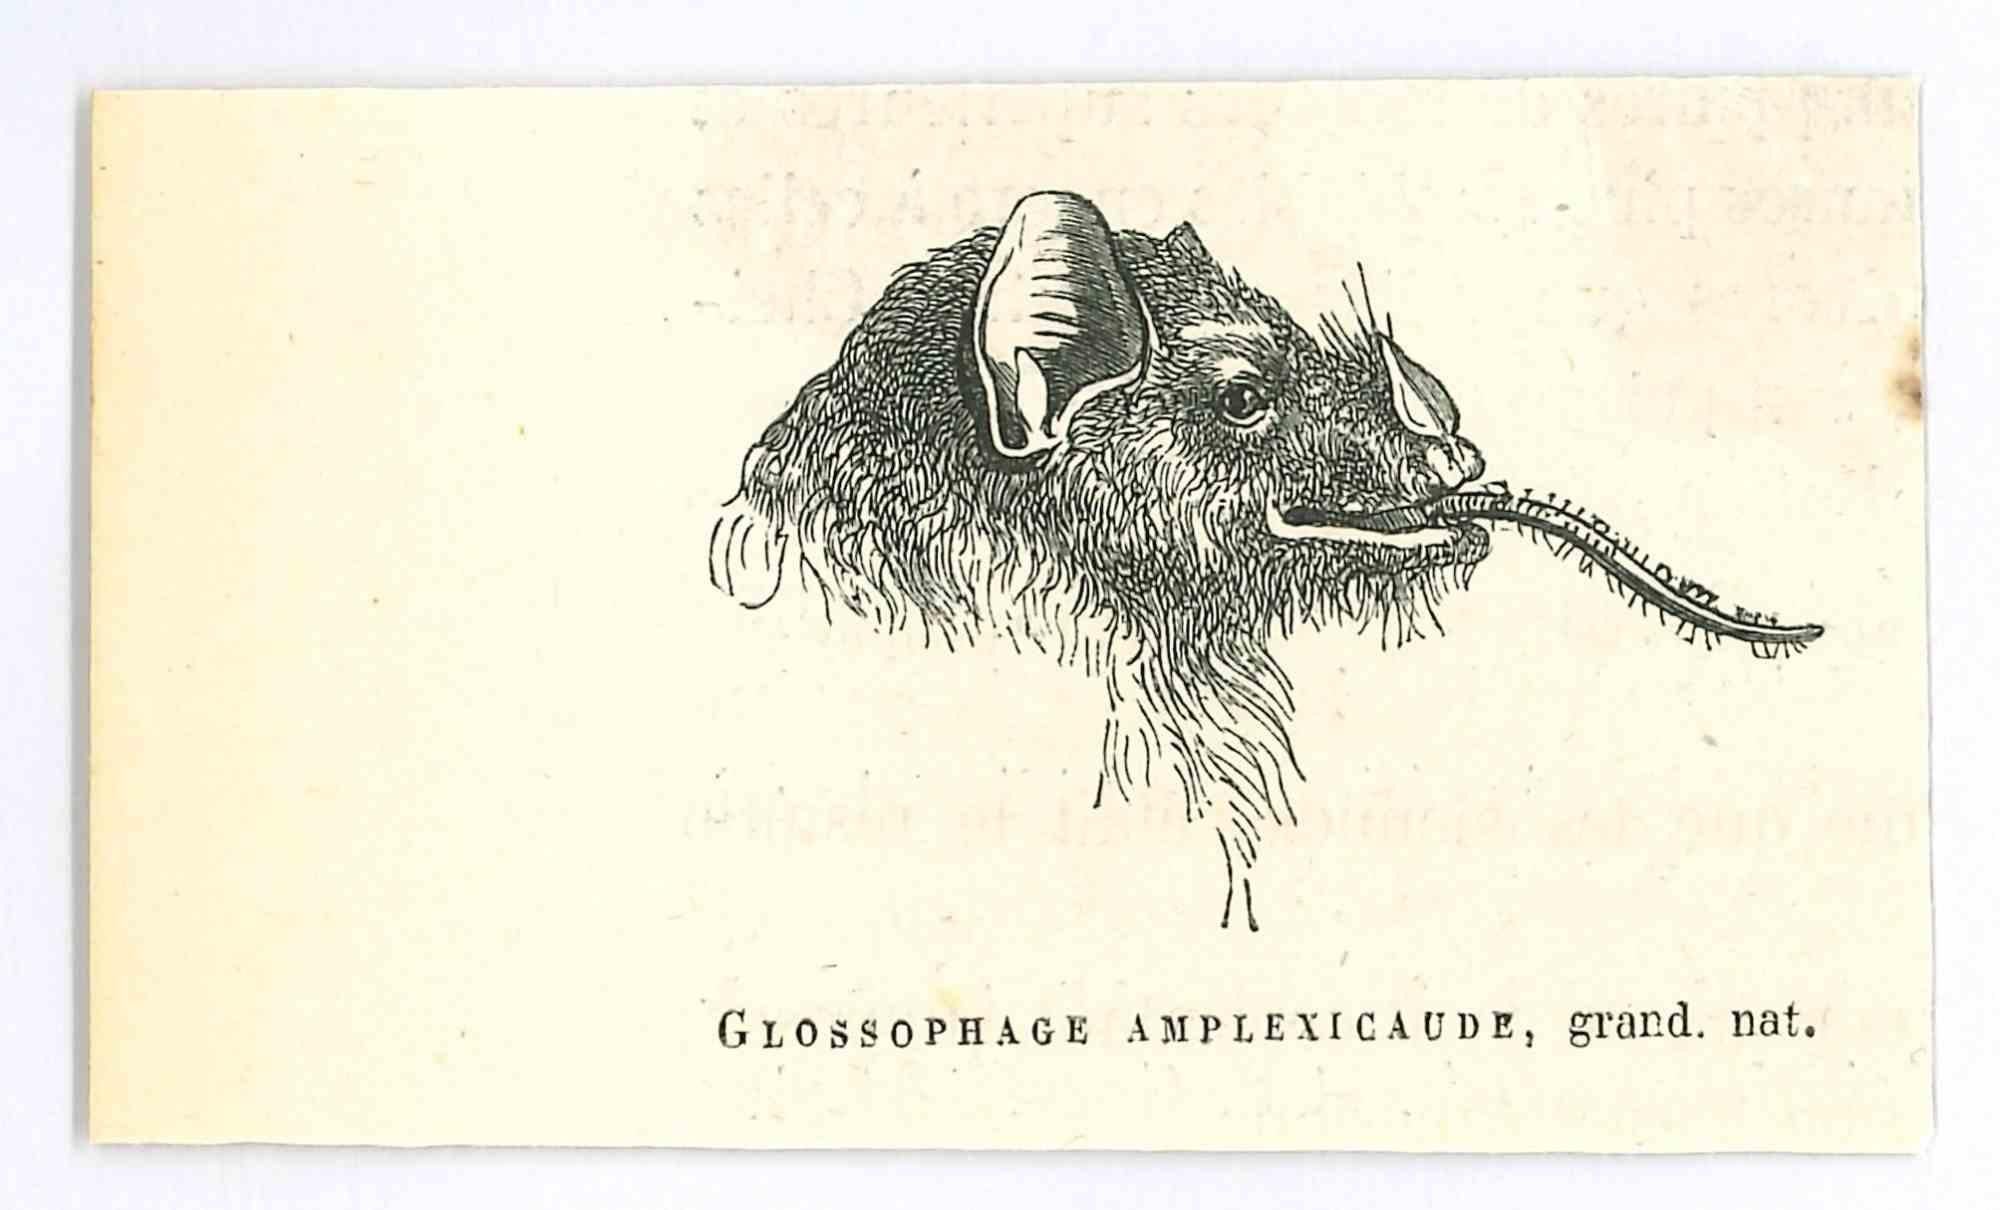 Glossophage is an original lithograph on ivory-colored paper, realized by Paul Gervais (1816-1879). The artwork is from The Series of "Les Trois Règnes de la Nature", and was published in 1854.

Good conditions.

Titled on the lower. With the notes